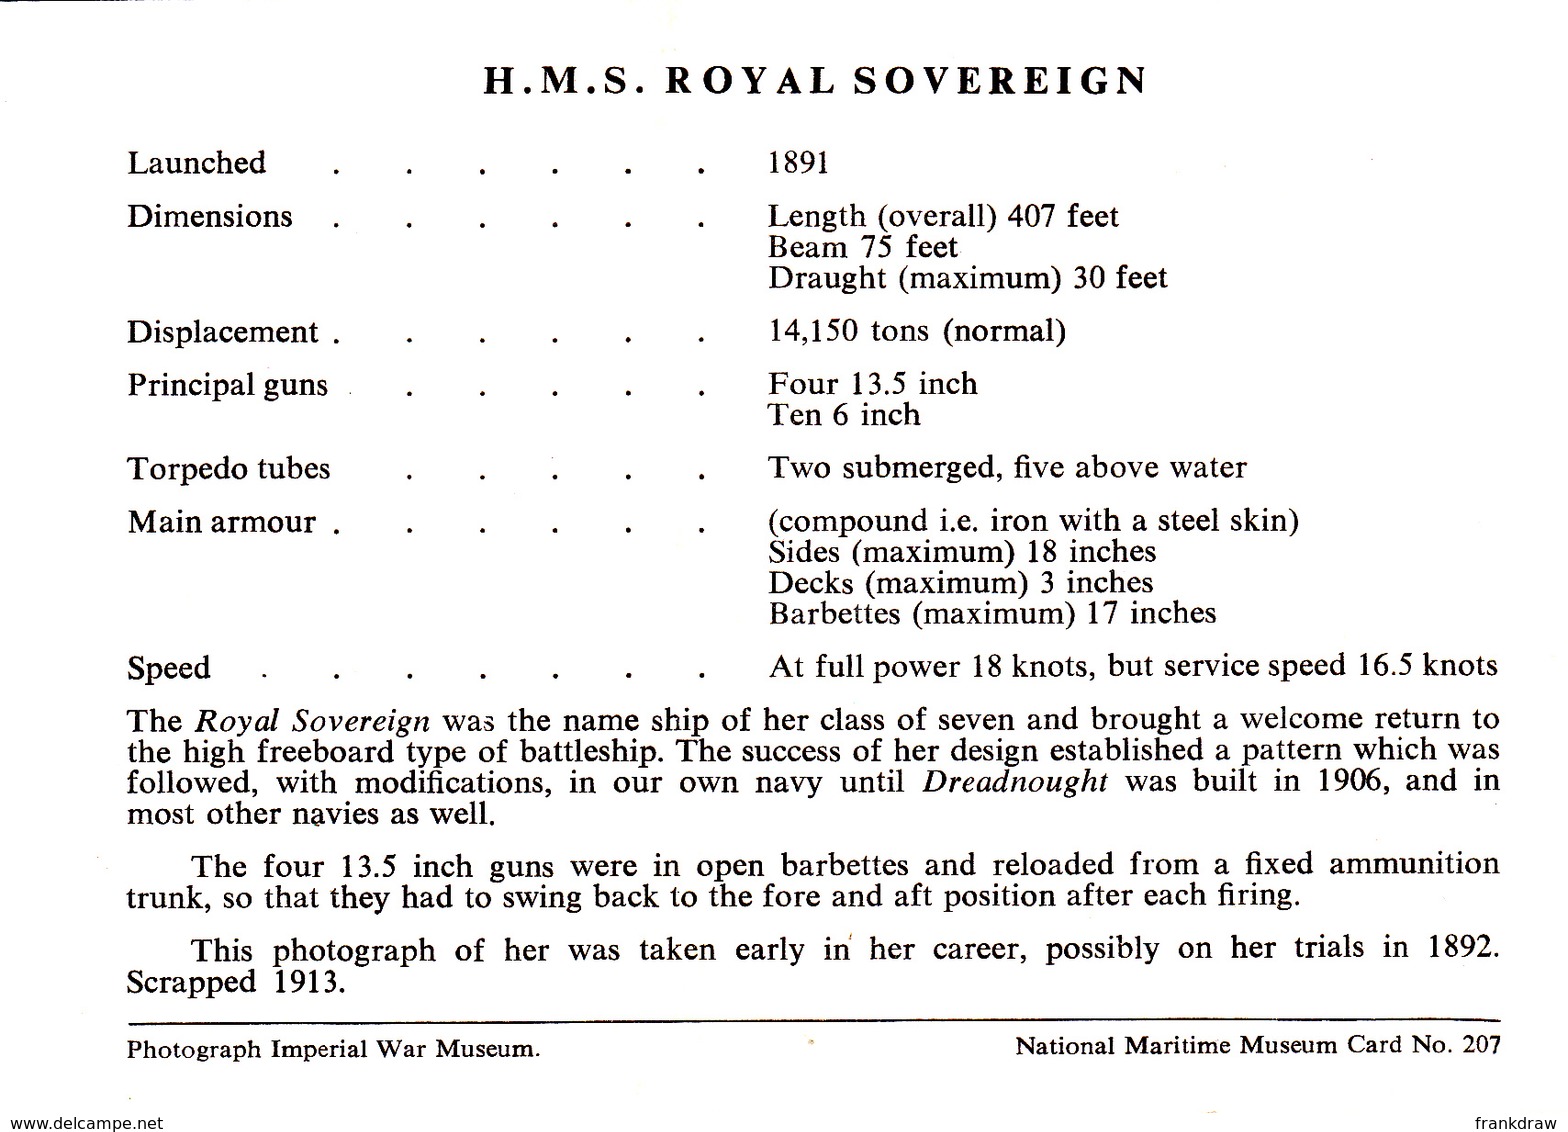 Postcard  Sized Fact Sheet On H.M.S. Royal Sovereign 1892 Card No..207 Unused Very Good - Unclassified